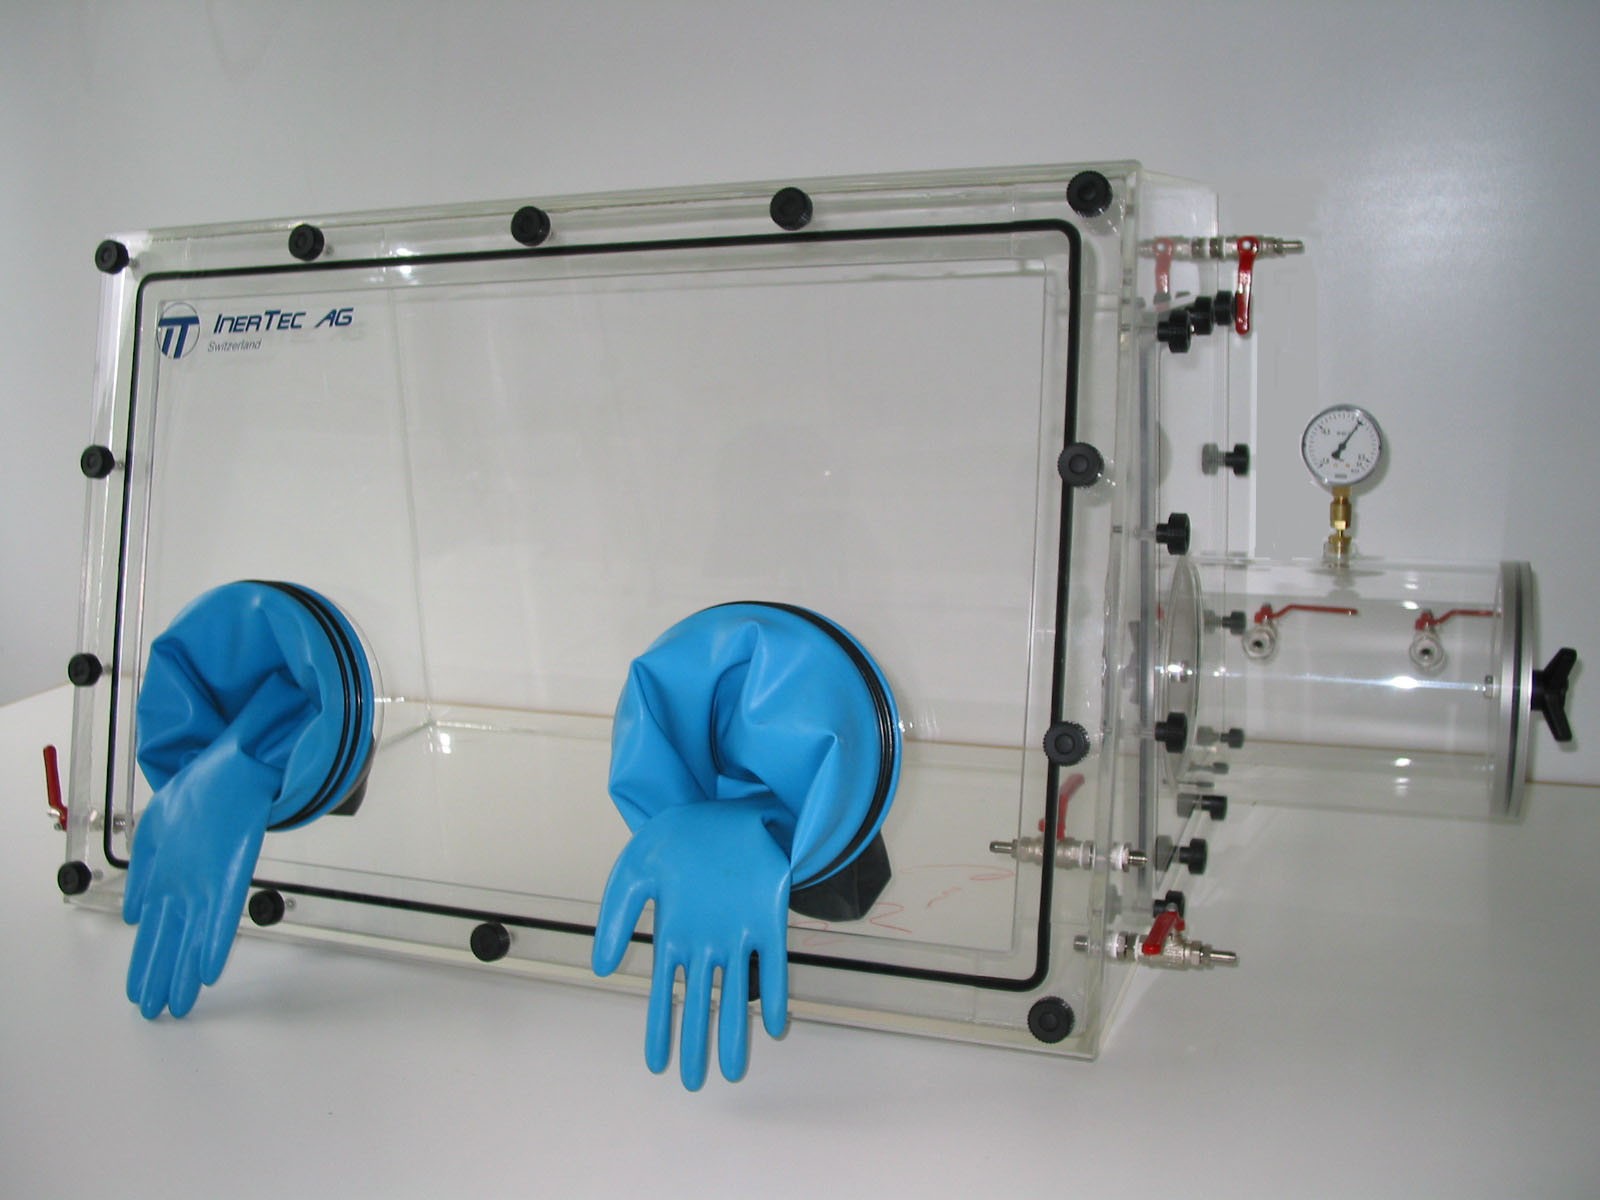 Glovebox made of acrylic&gt; Gas filling: automatic flushing with pressure control, front version: standard, side version: round vacuum lock, control: oxygen regulator and humidity display with data logger